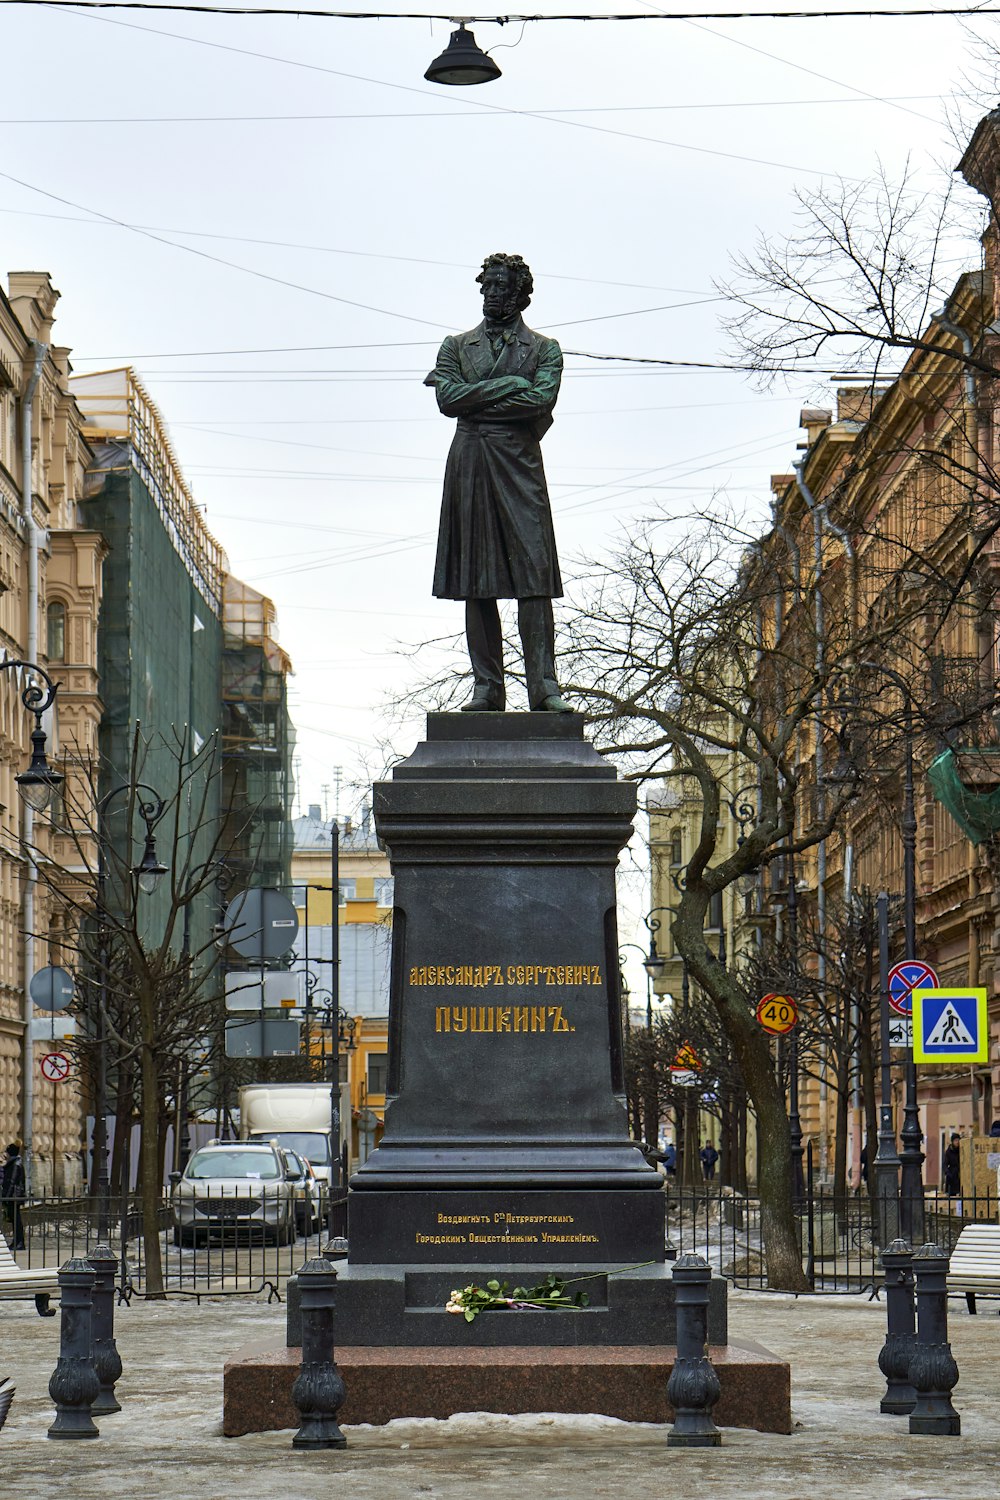 a statue of a man standing on top of a pedestal